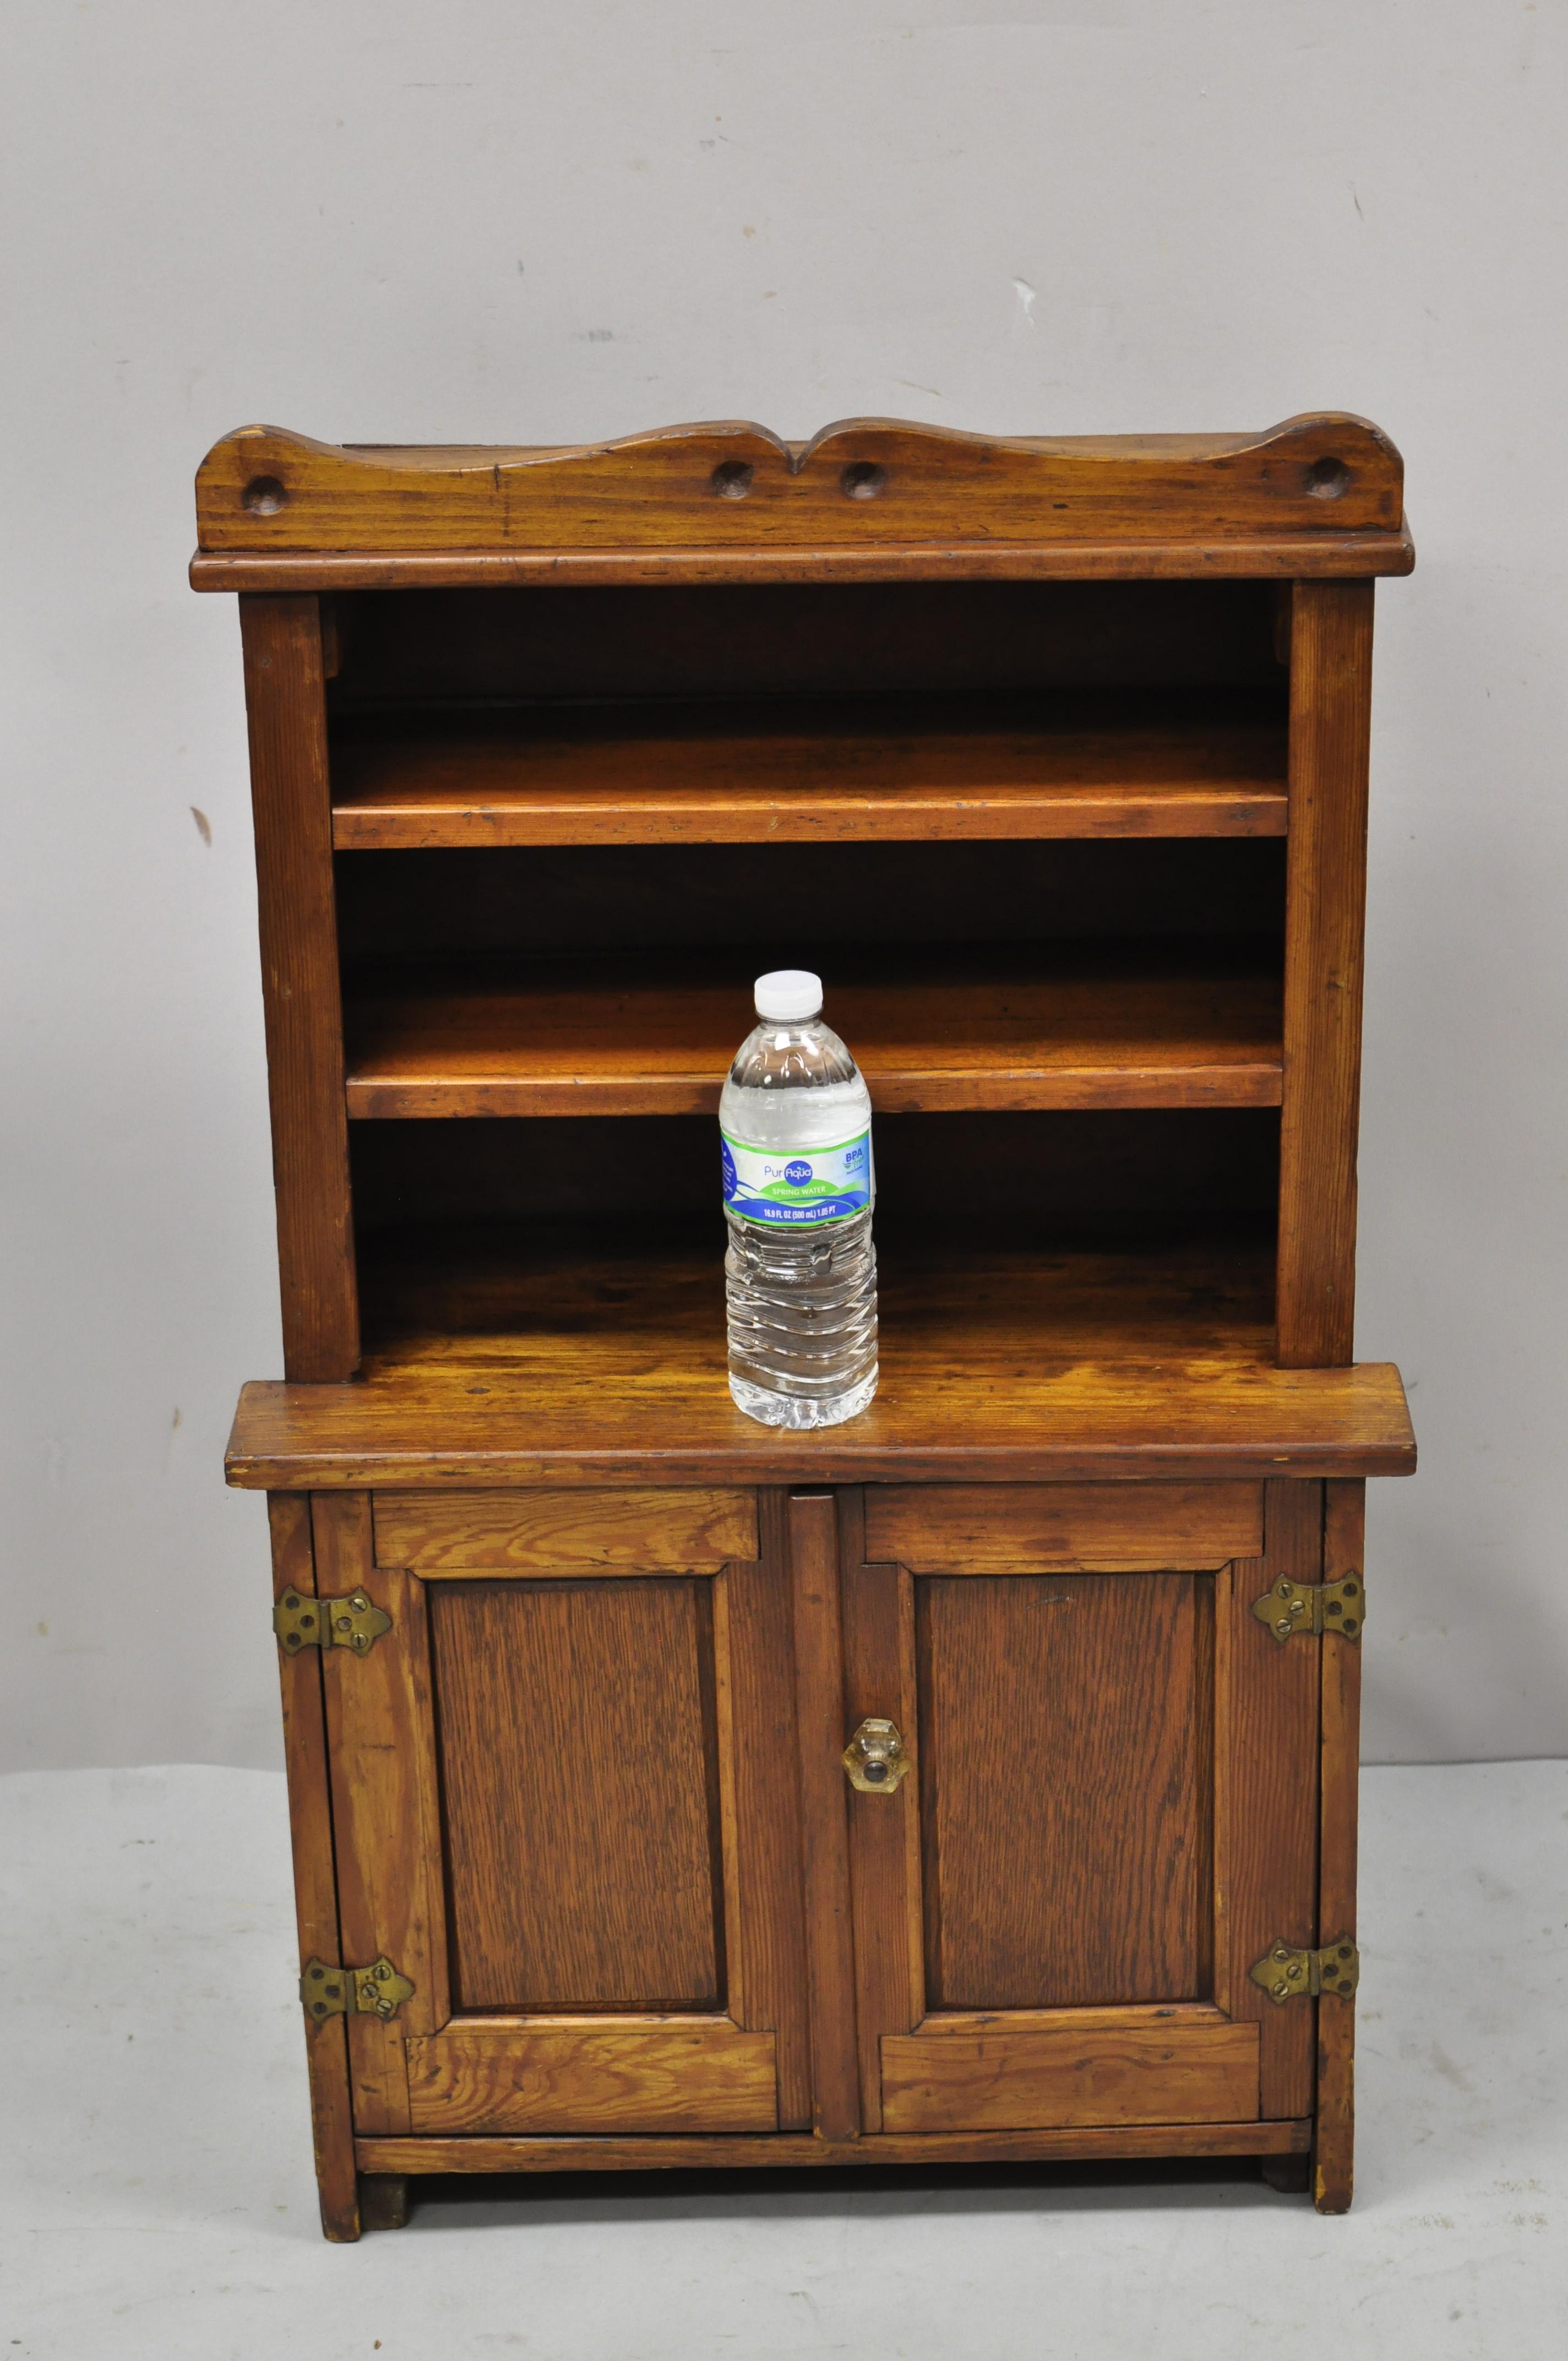 Antique oak wood small miniature cupboard colonial kitchen childs cabinet. Item features glass handles, solid oak wood construction, beautiful wood grain, very nice antique item, quality American craftsmanship. Circa early 1900s. Measurements: 32.5